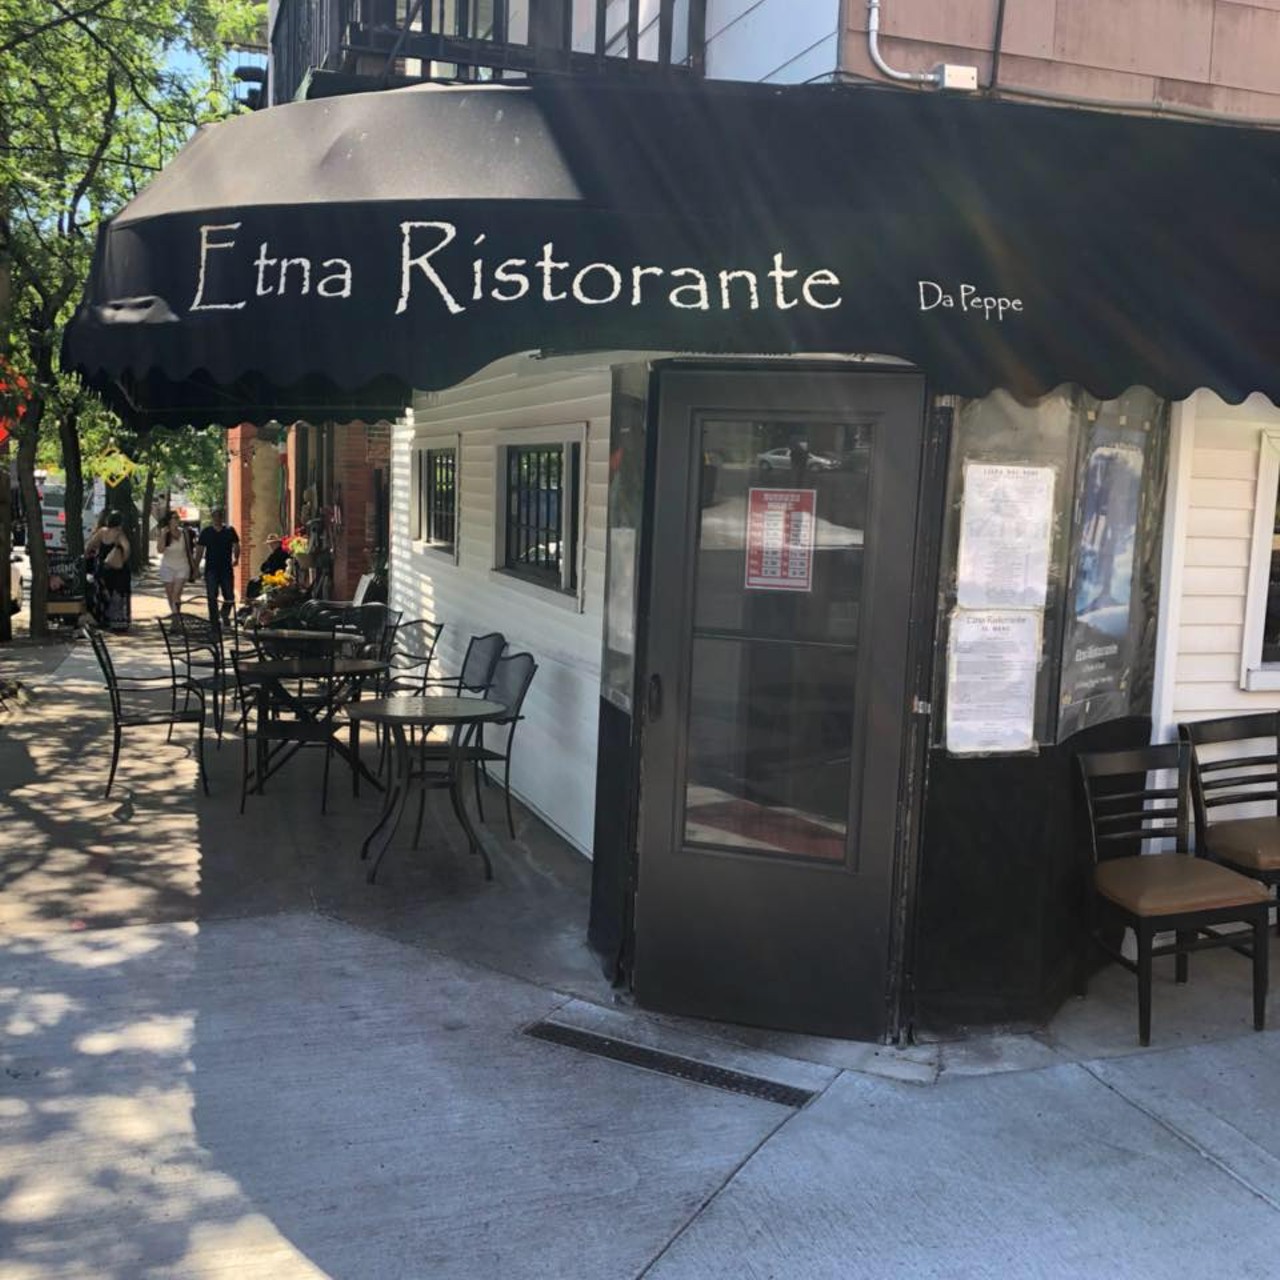  Etna
11919 Mayfield Rd., Cleveland 
This romantic, tightly packed Little Italy spot is one of the best Italian restaurants in town. A great wine list, authentic menu items and a dark ambience recalls the Old Country that created this remarkable cuisine.
Photo via Etna Ristorante/Facebook